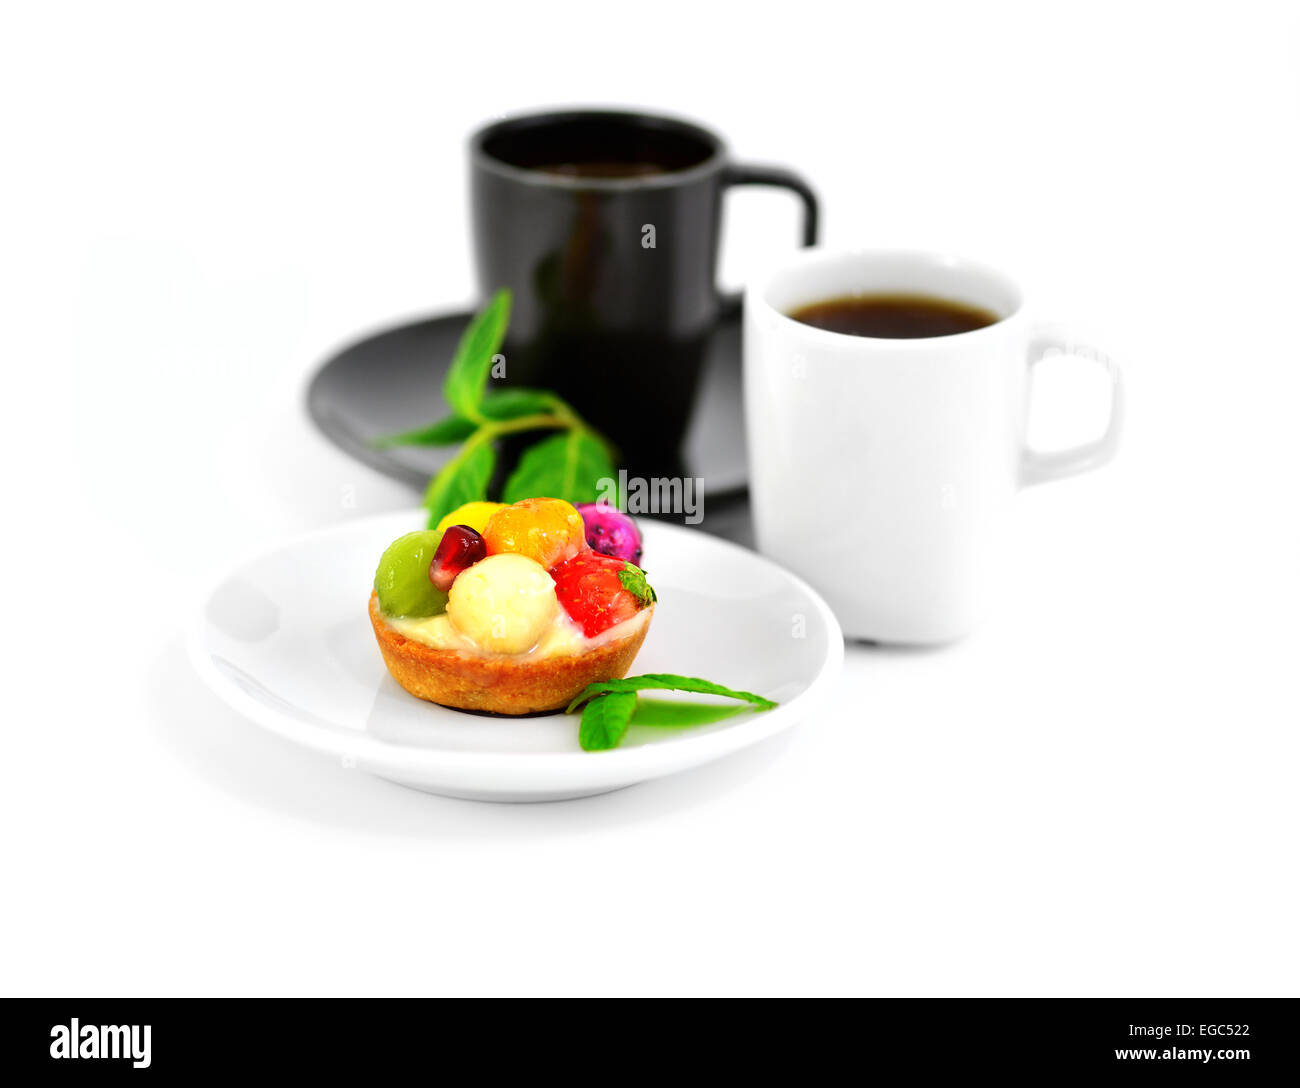 Small fruit cake and two cups of coffee on a blurry background. Stock Photo